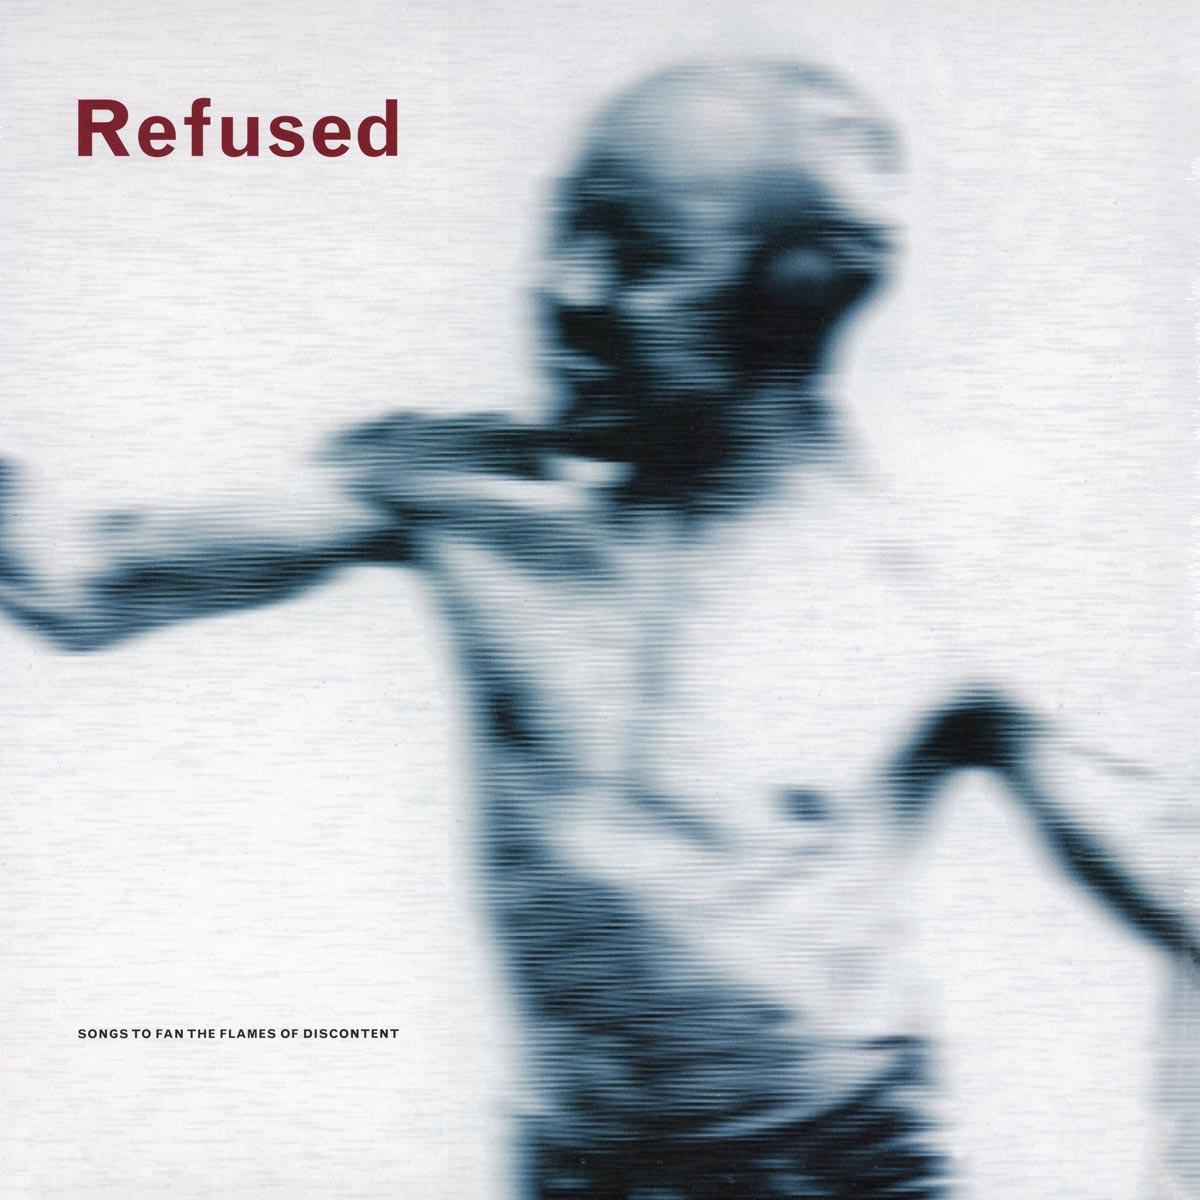 Refused - Songs to fan the flames of discontent (Gatefold) - 2 x LP